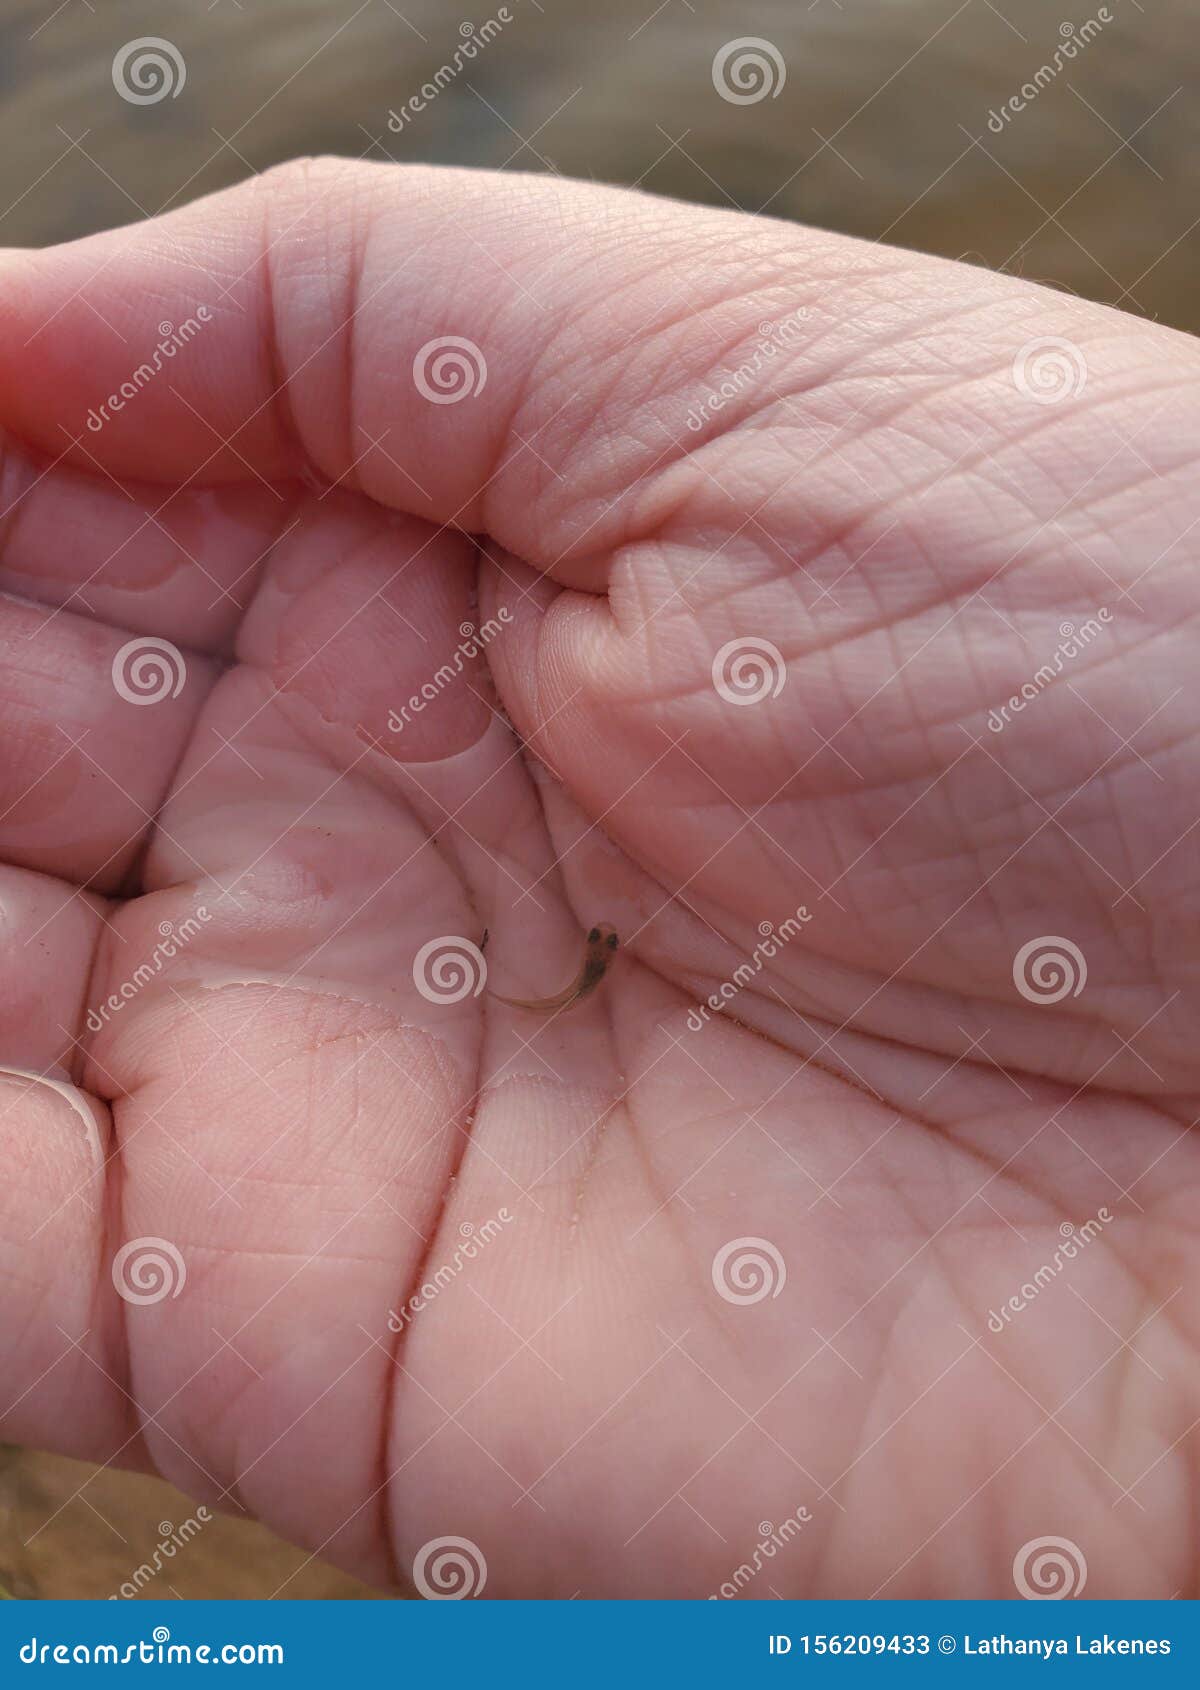 Baby Fish in the Palm of My Hand Stock Image - Image of minnow, lake:  156209433